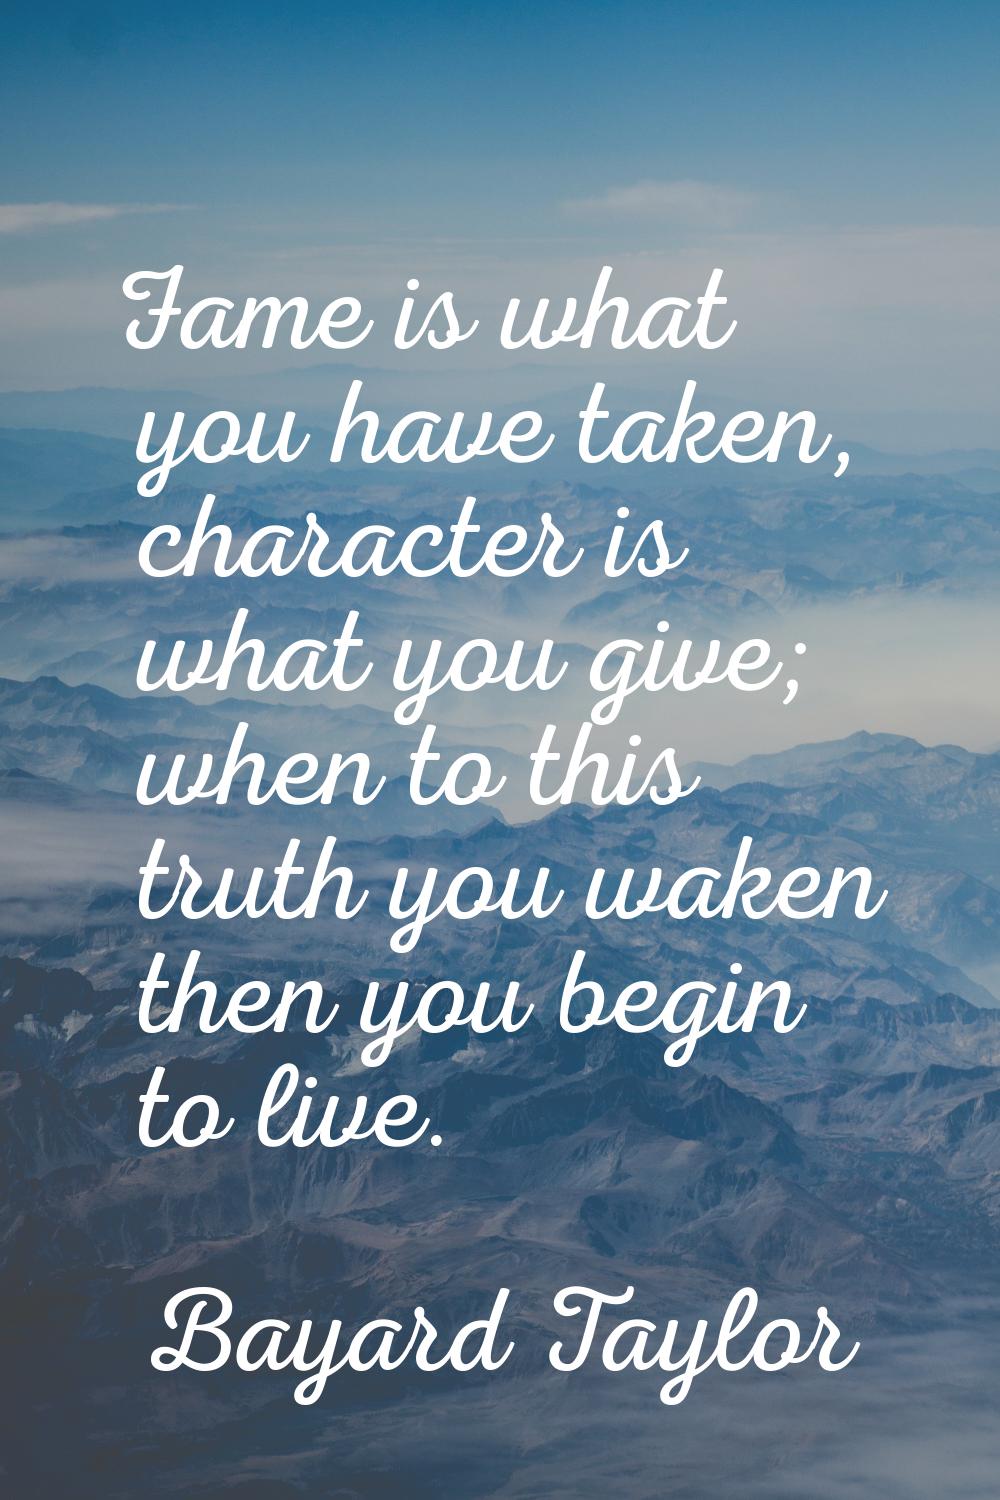 Fame is what you have taken, character is what you give; when to this truth you waken then you begi